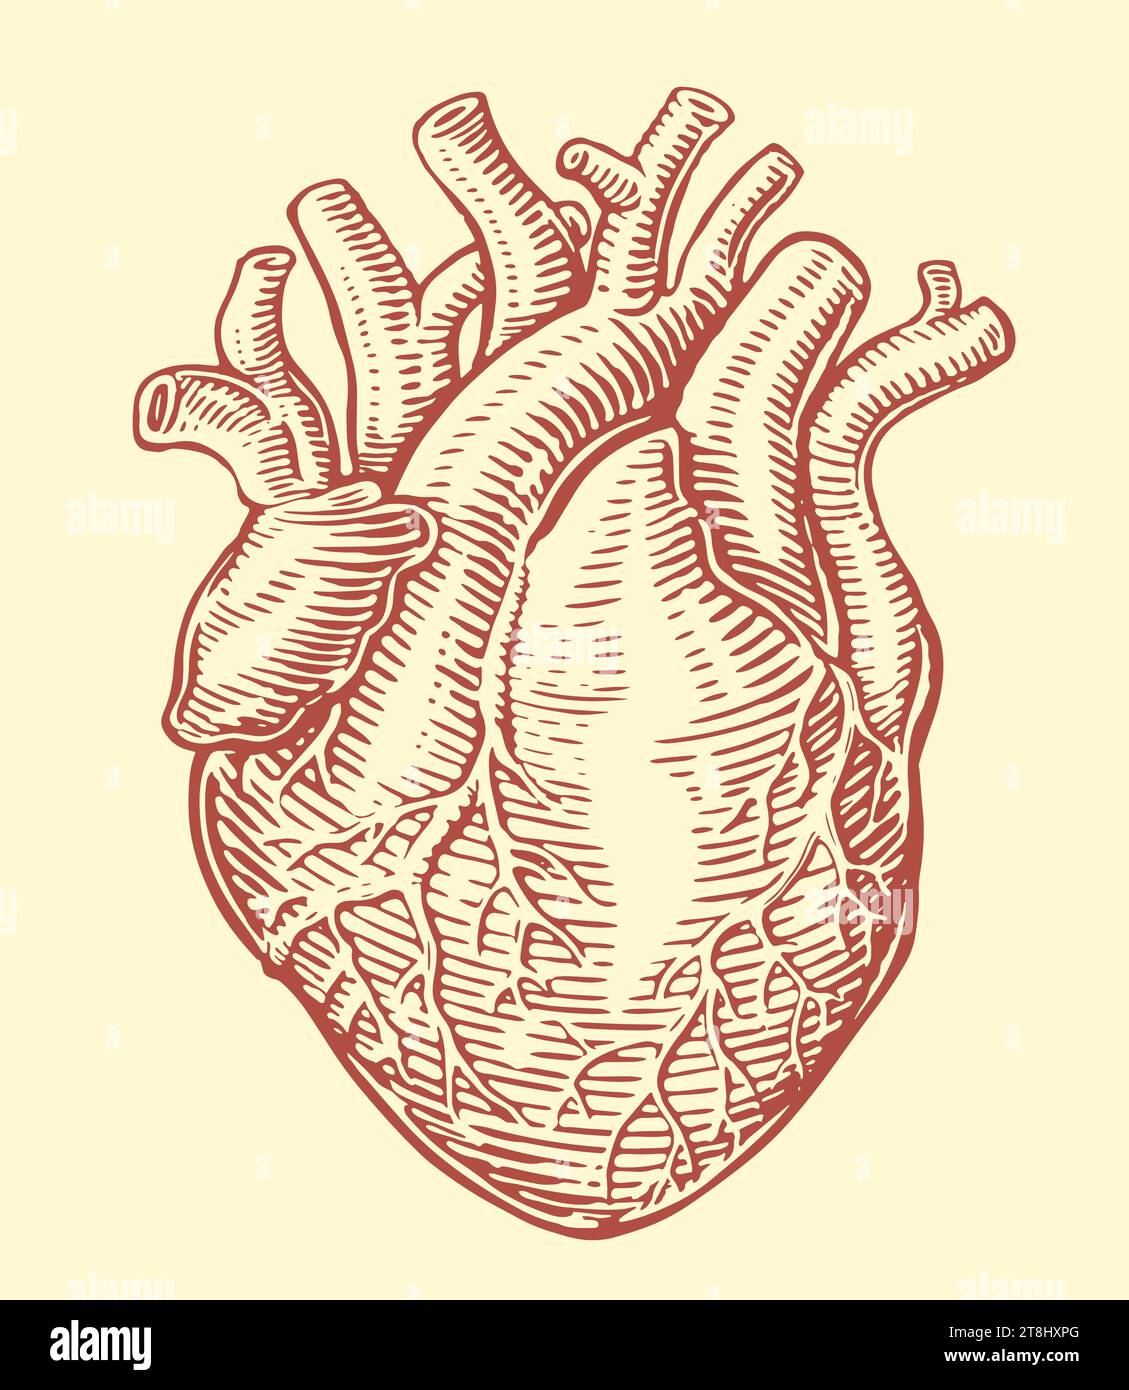 Human heart with anatomical venous system. Hand drawn sketch vintage vector illustration Stock Vector